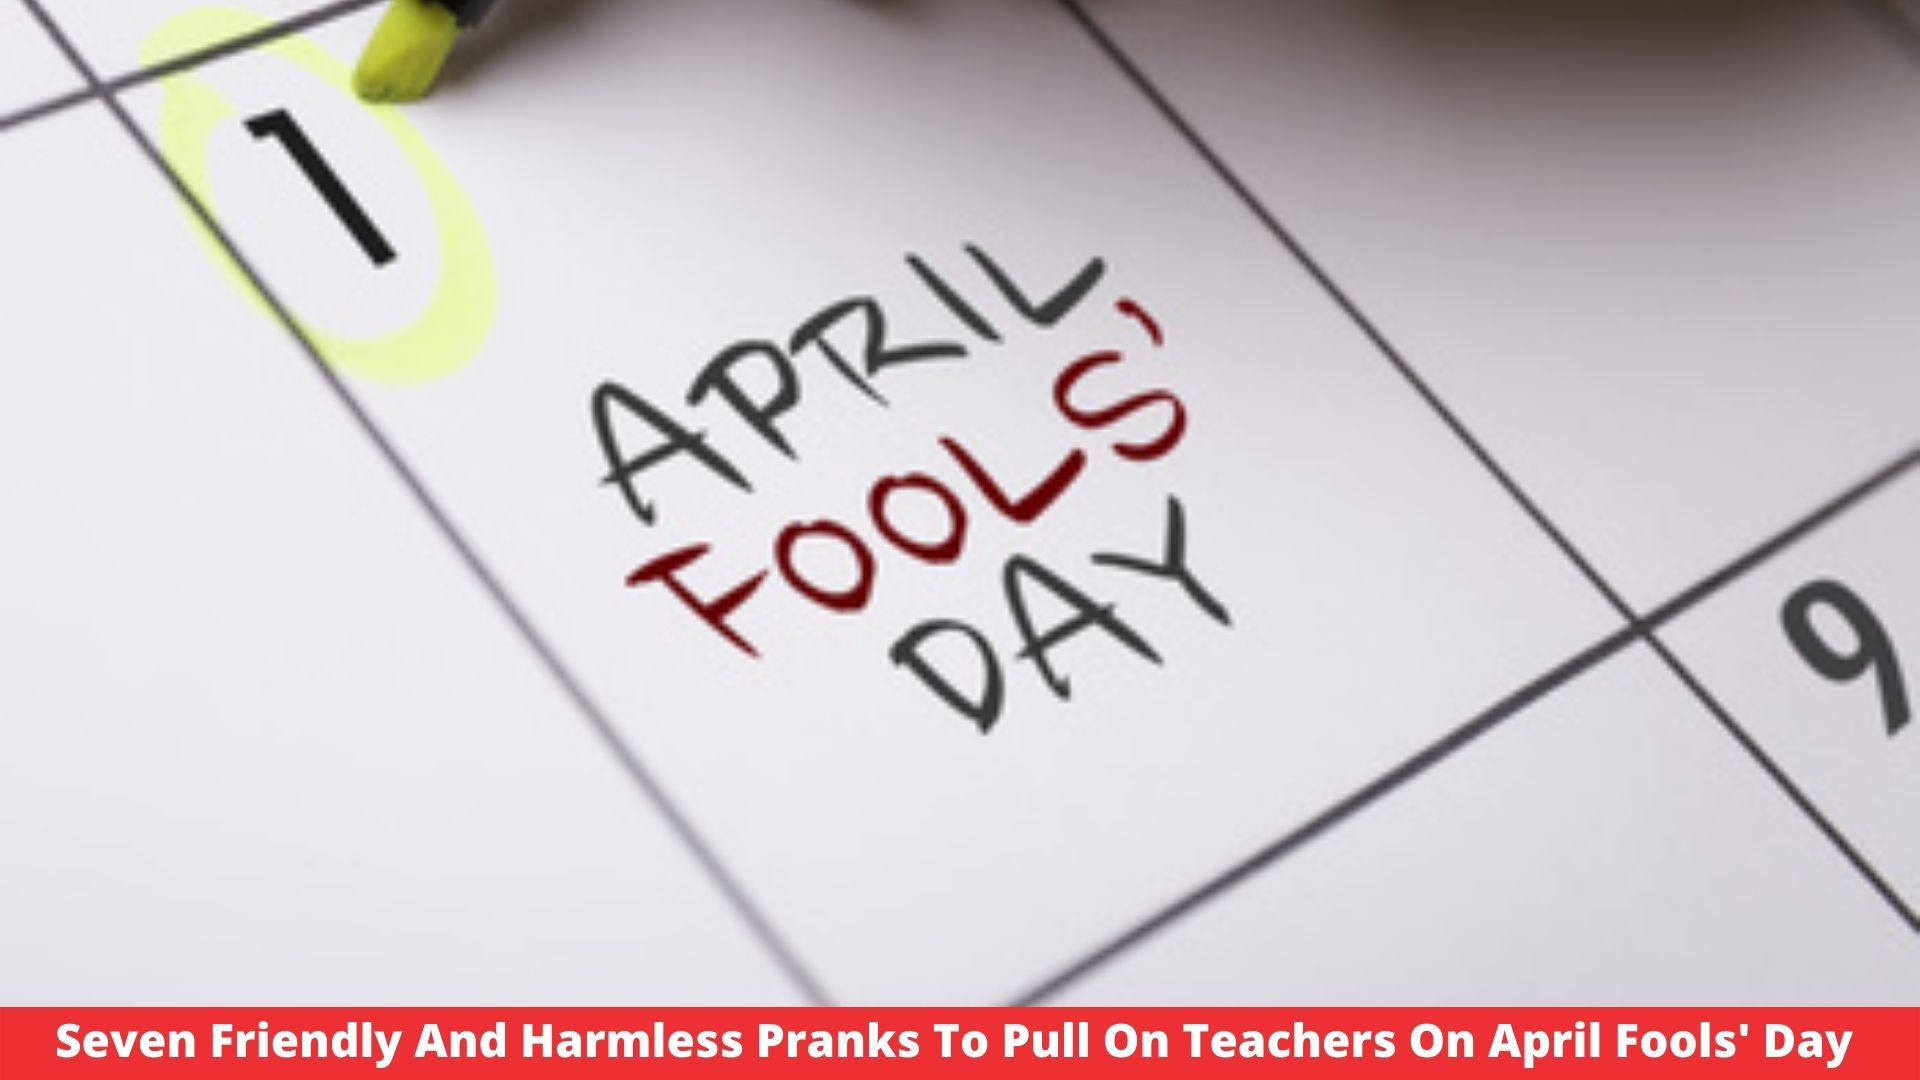 Seven Friendly And Harmless Pranks To Pull On Teachers On April Fools' Day